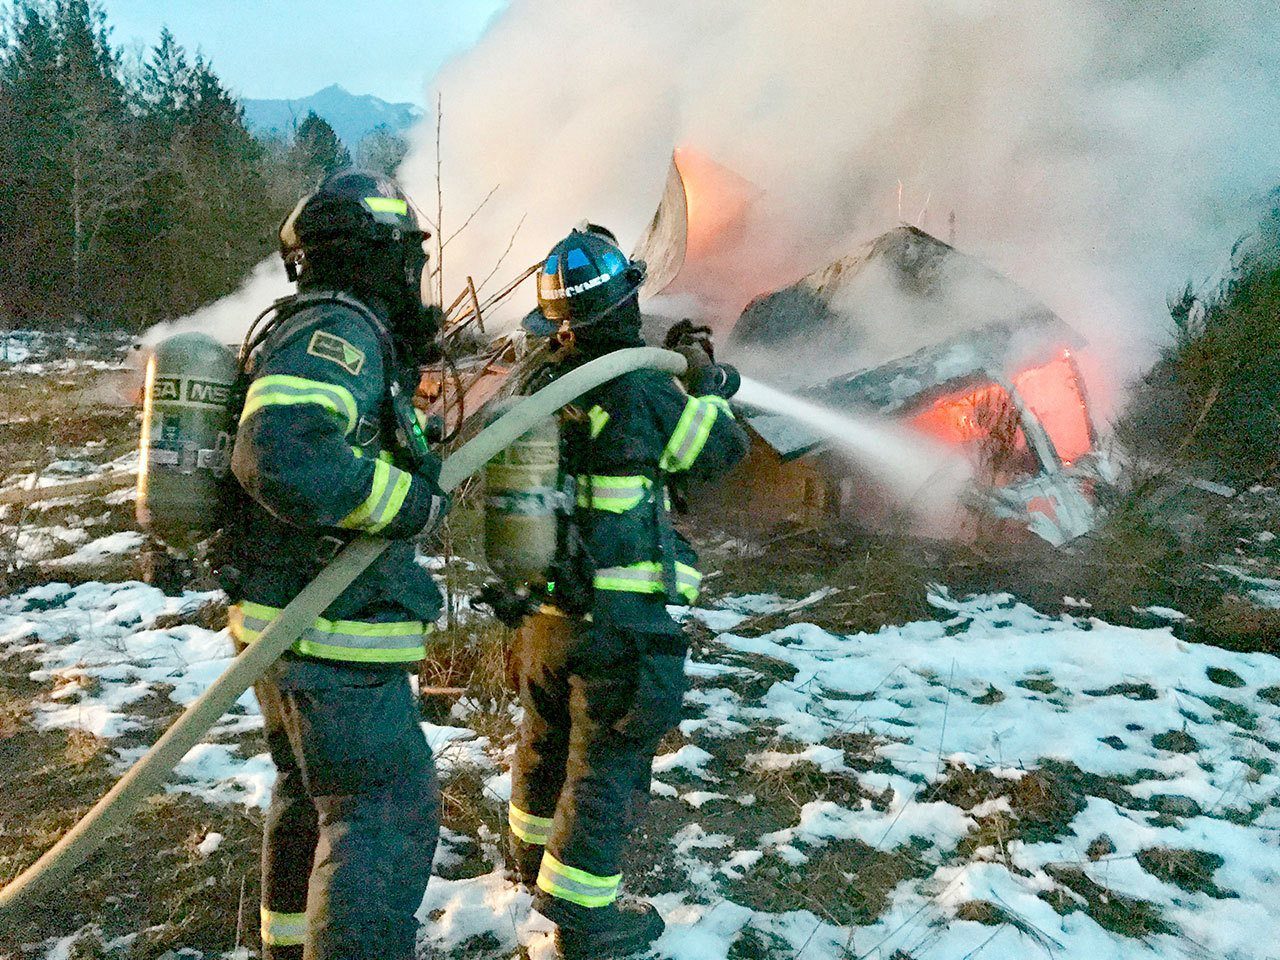 At 4:23 p.m. Wednesday, crews from Clallam Fire District No. 2 responded to a structure fire at 237979 U.S. Highway 101 in the old Clallam Timber log yard, west of Port Angeles (Clallam Fire District No. 2)